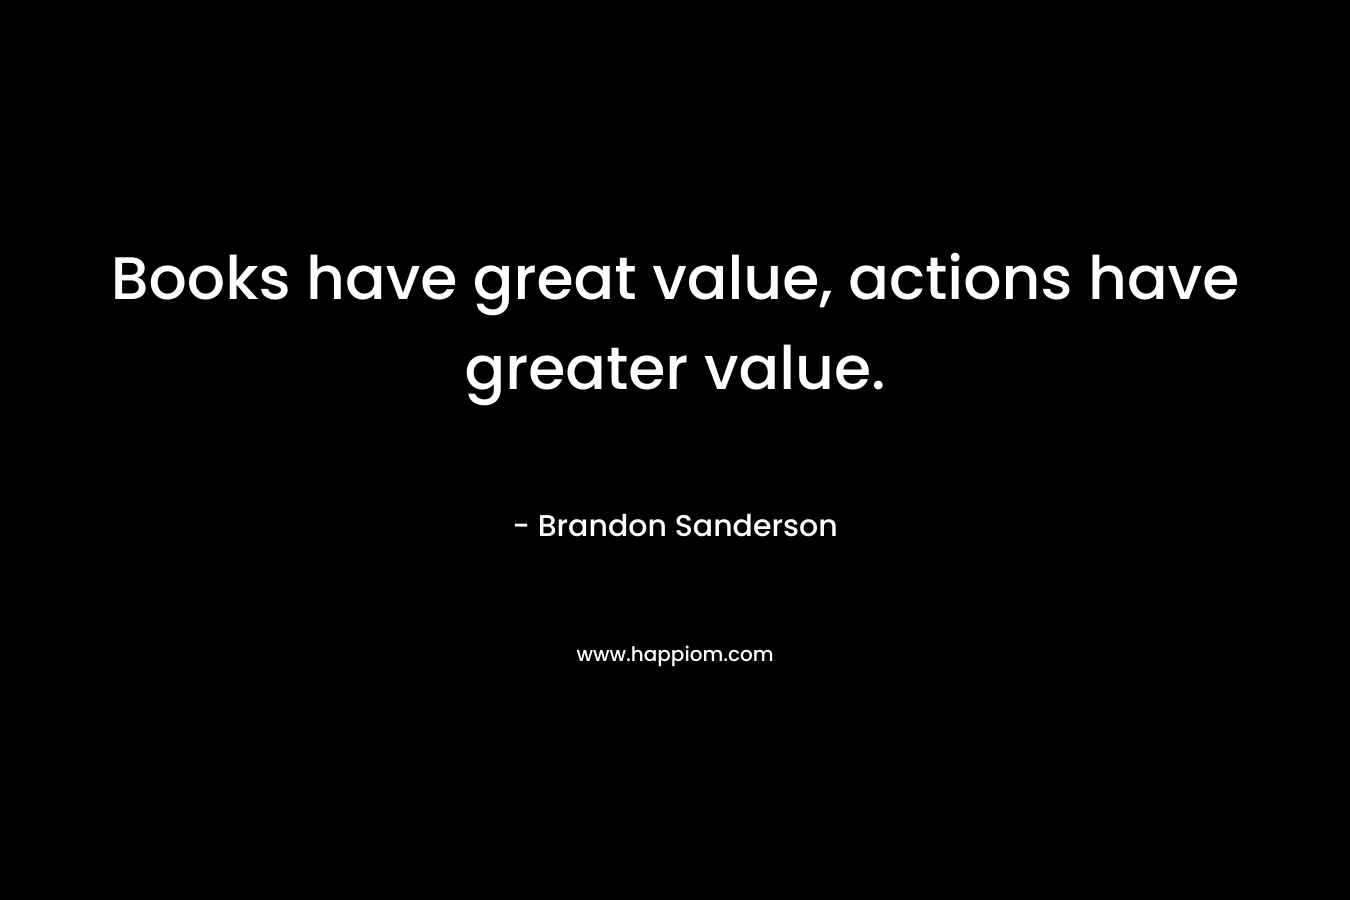 Books have great value, actions have greater value.